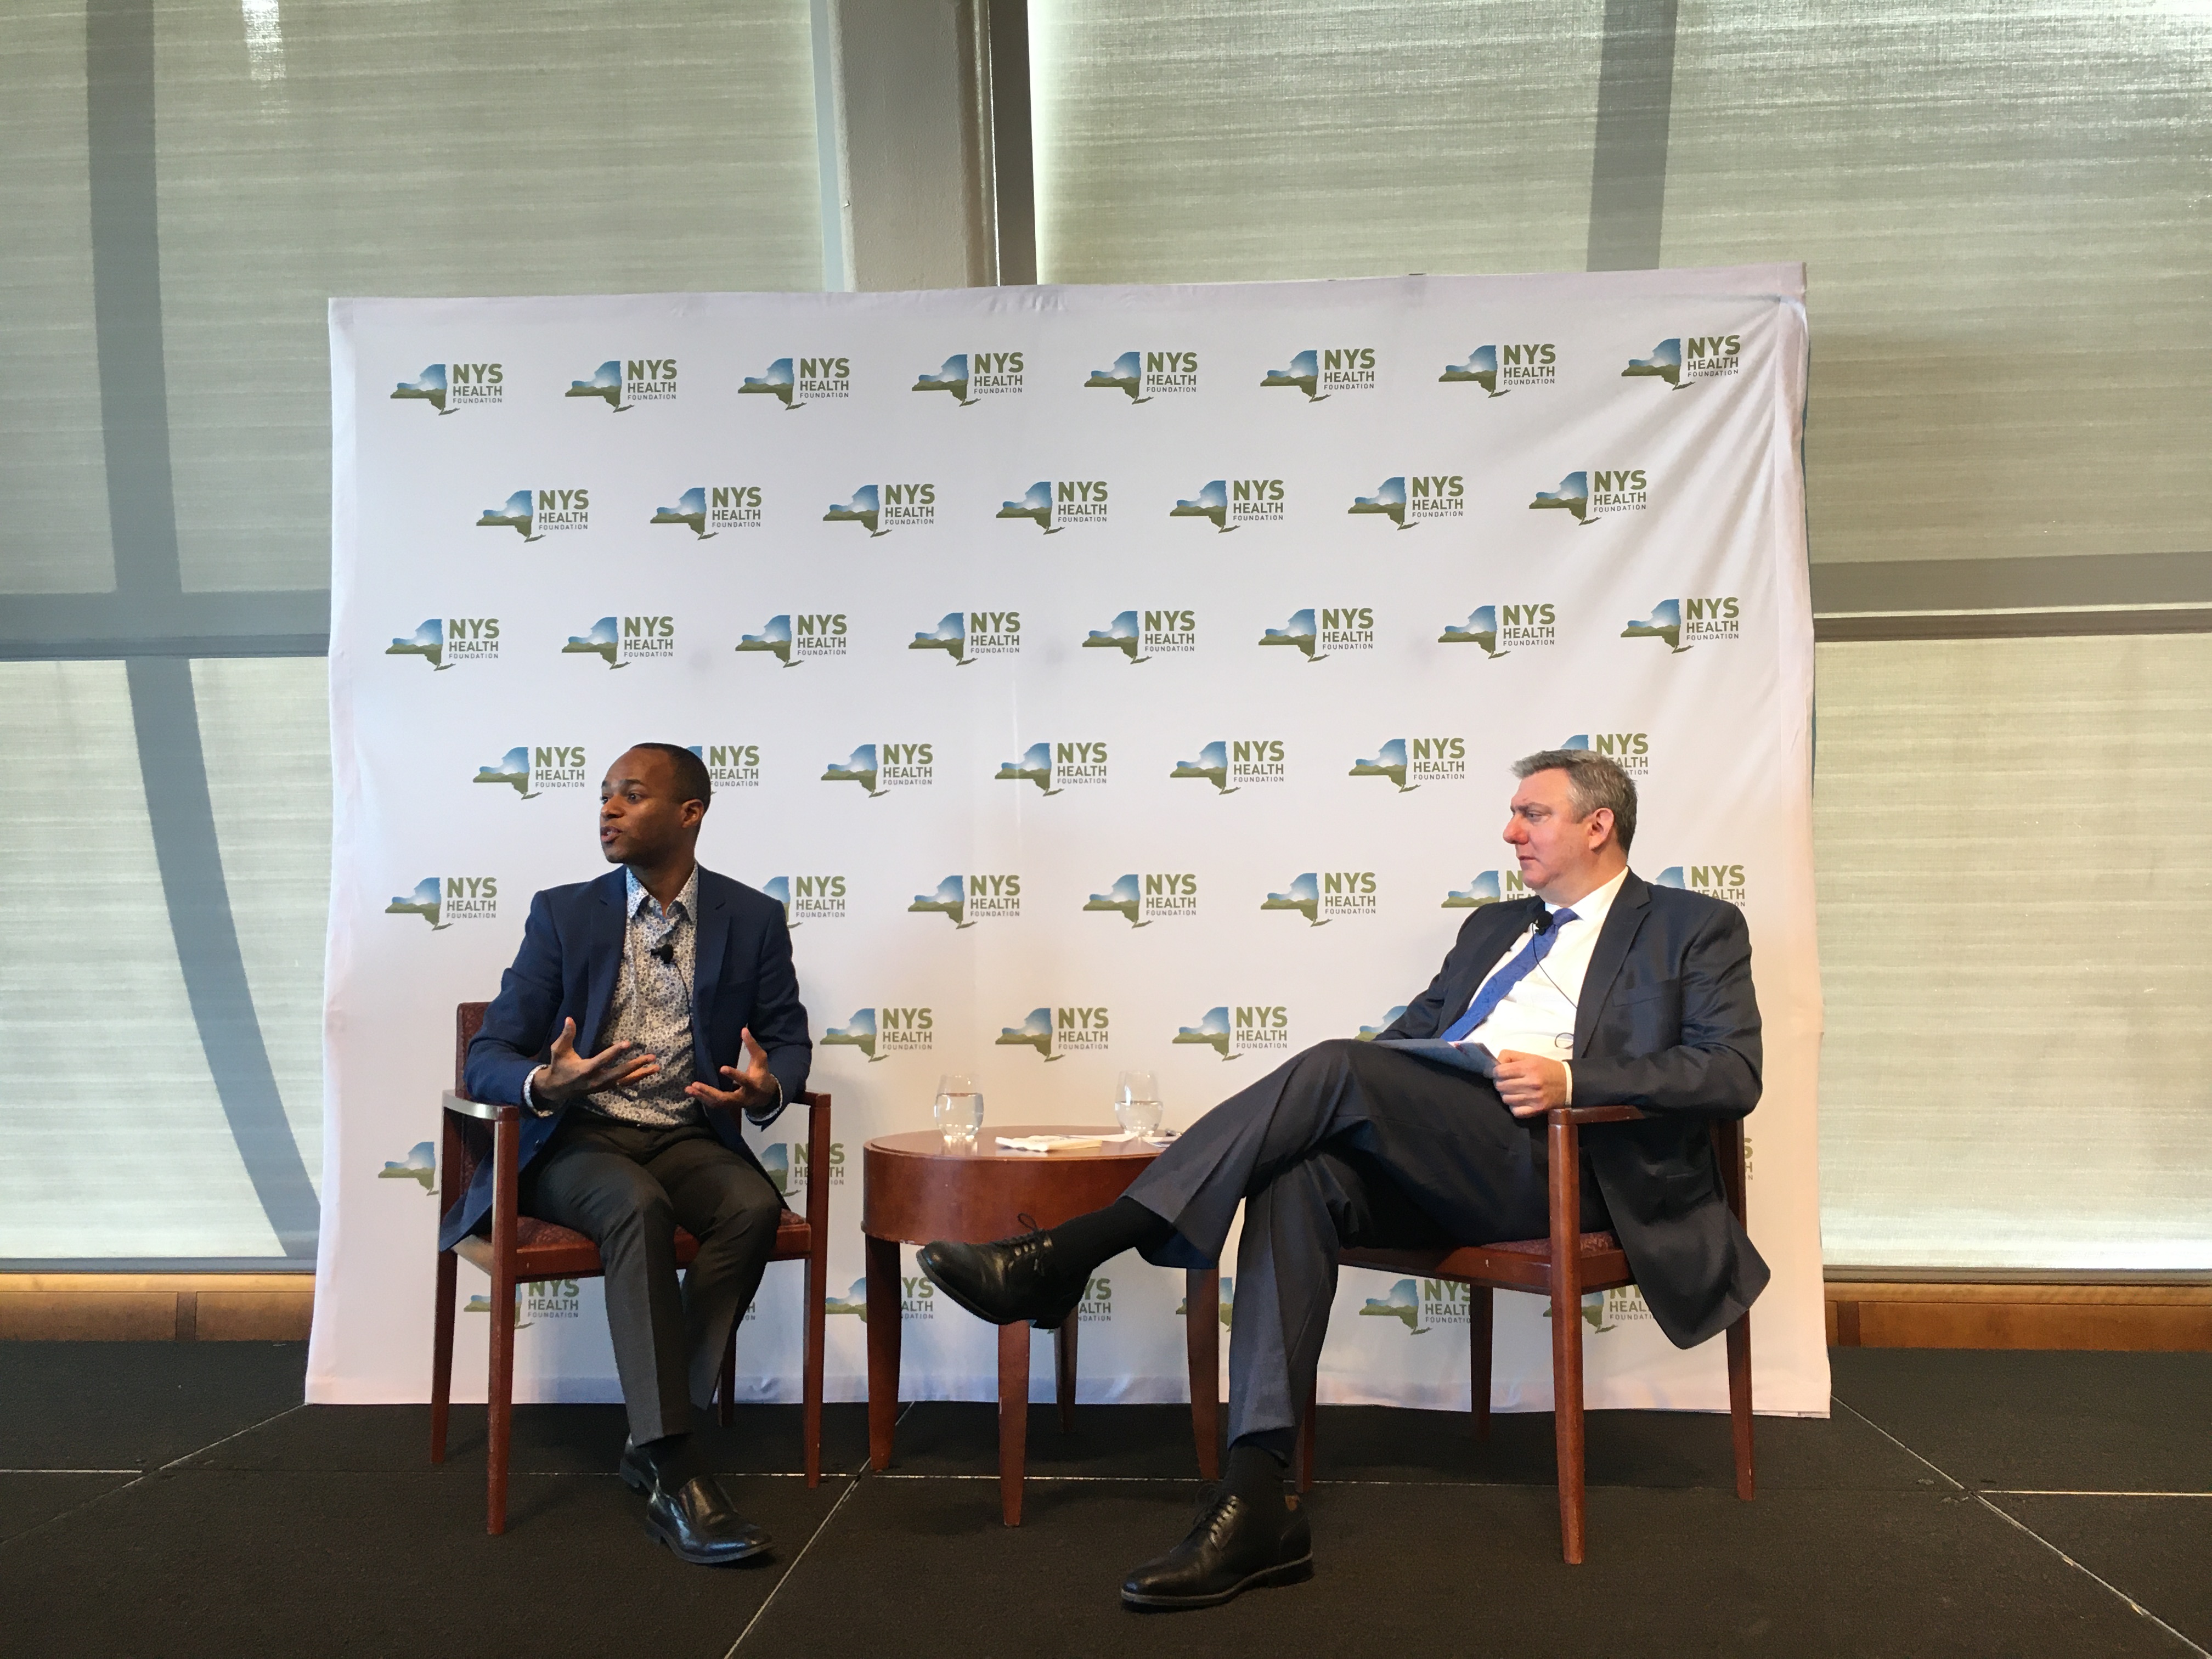 David Sandman, President and CEO of NYHealth, sits on stage with keynote Justin Garrett Moore at an NYHealth conference.